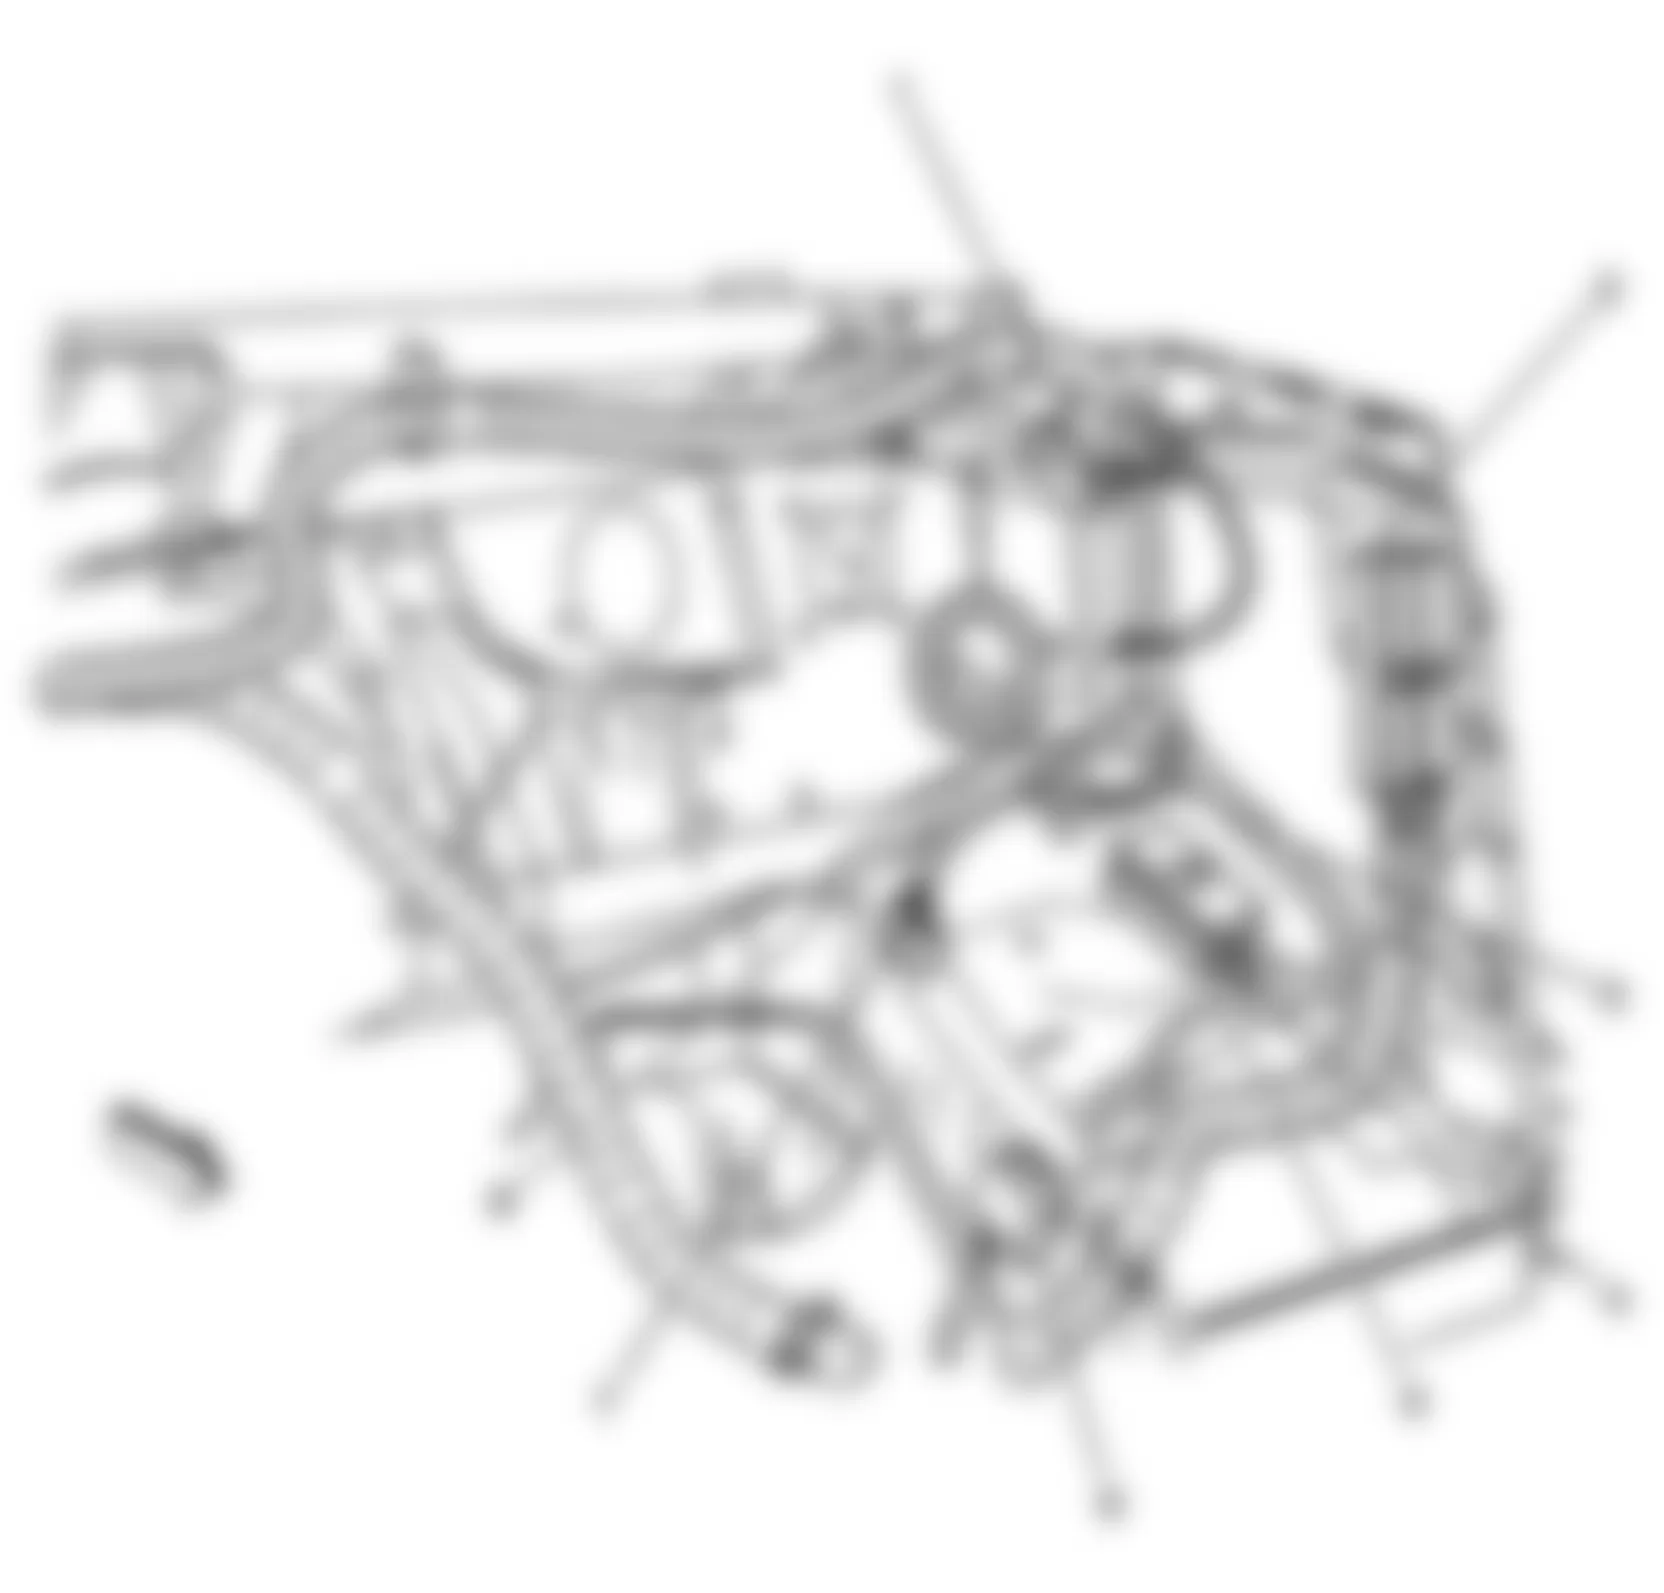 GMC Savana G2500 2008 - Component Locations -  Left Rear Of Engine Compartment